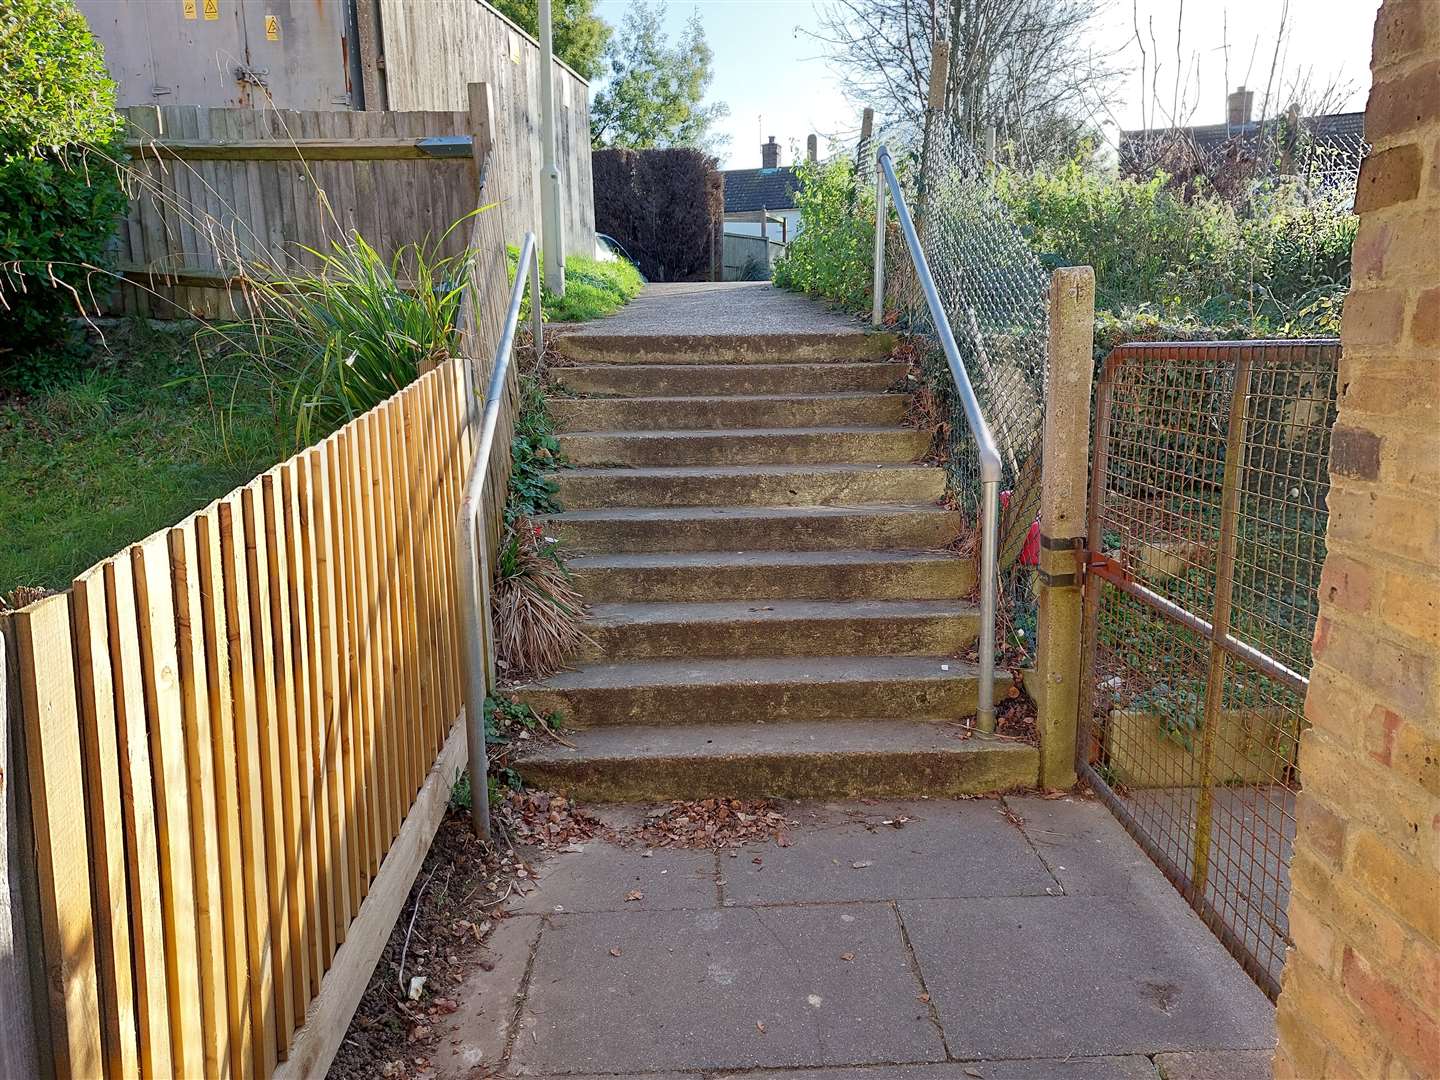 The steps from the car park at the rear of the shops